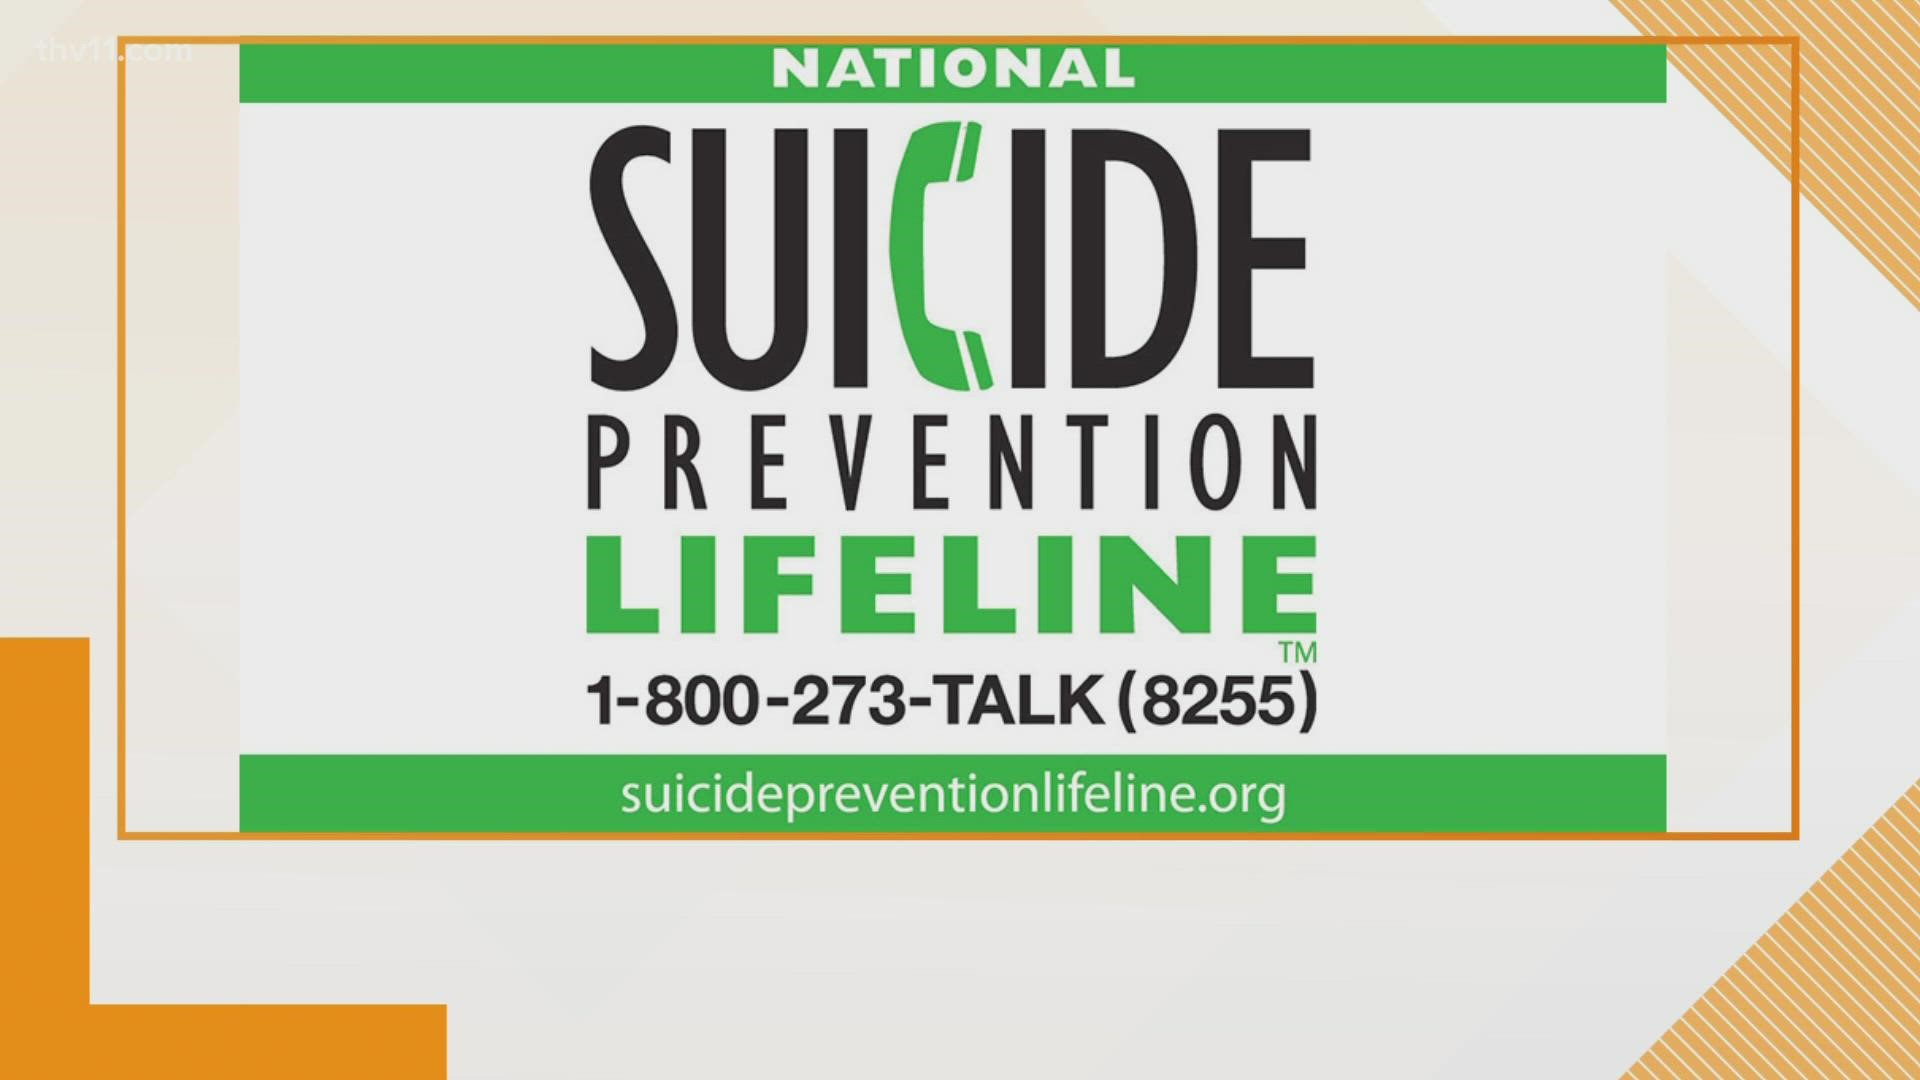 Suicide is the 10th leading cause of death in the United States nd it's the 2nd leading cause of death among people ages 10-34.